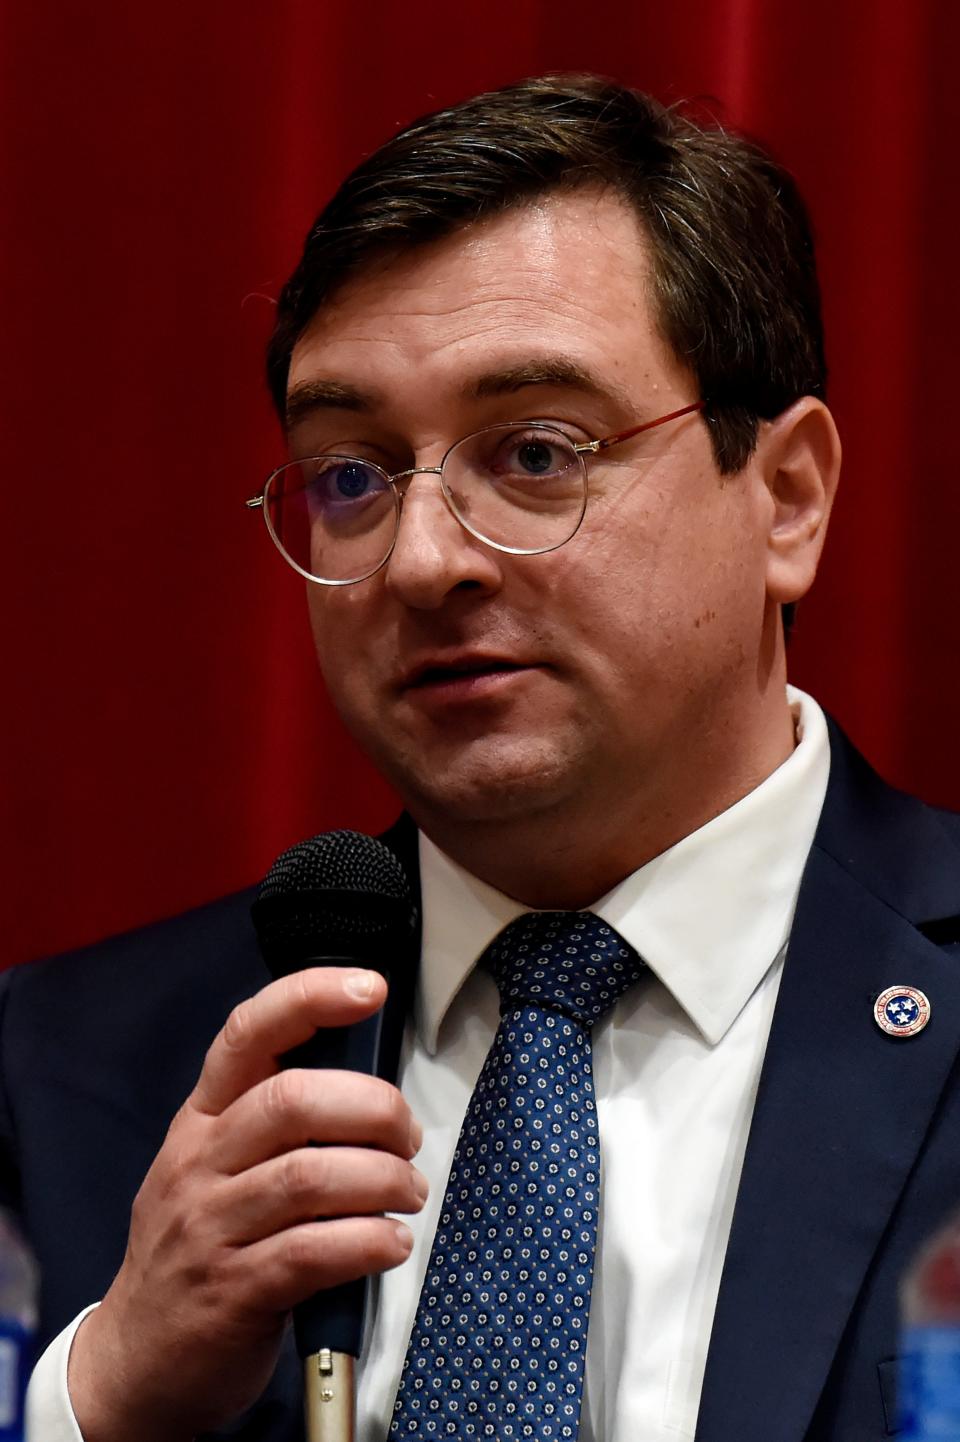 Tennessee Attorney General Jonathan Skrmetti speaks about the impact of social media has on children and families during a town hall meeting on Thursday, March 2, 2023, in Clarksville, Tenn. 